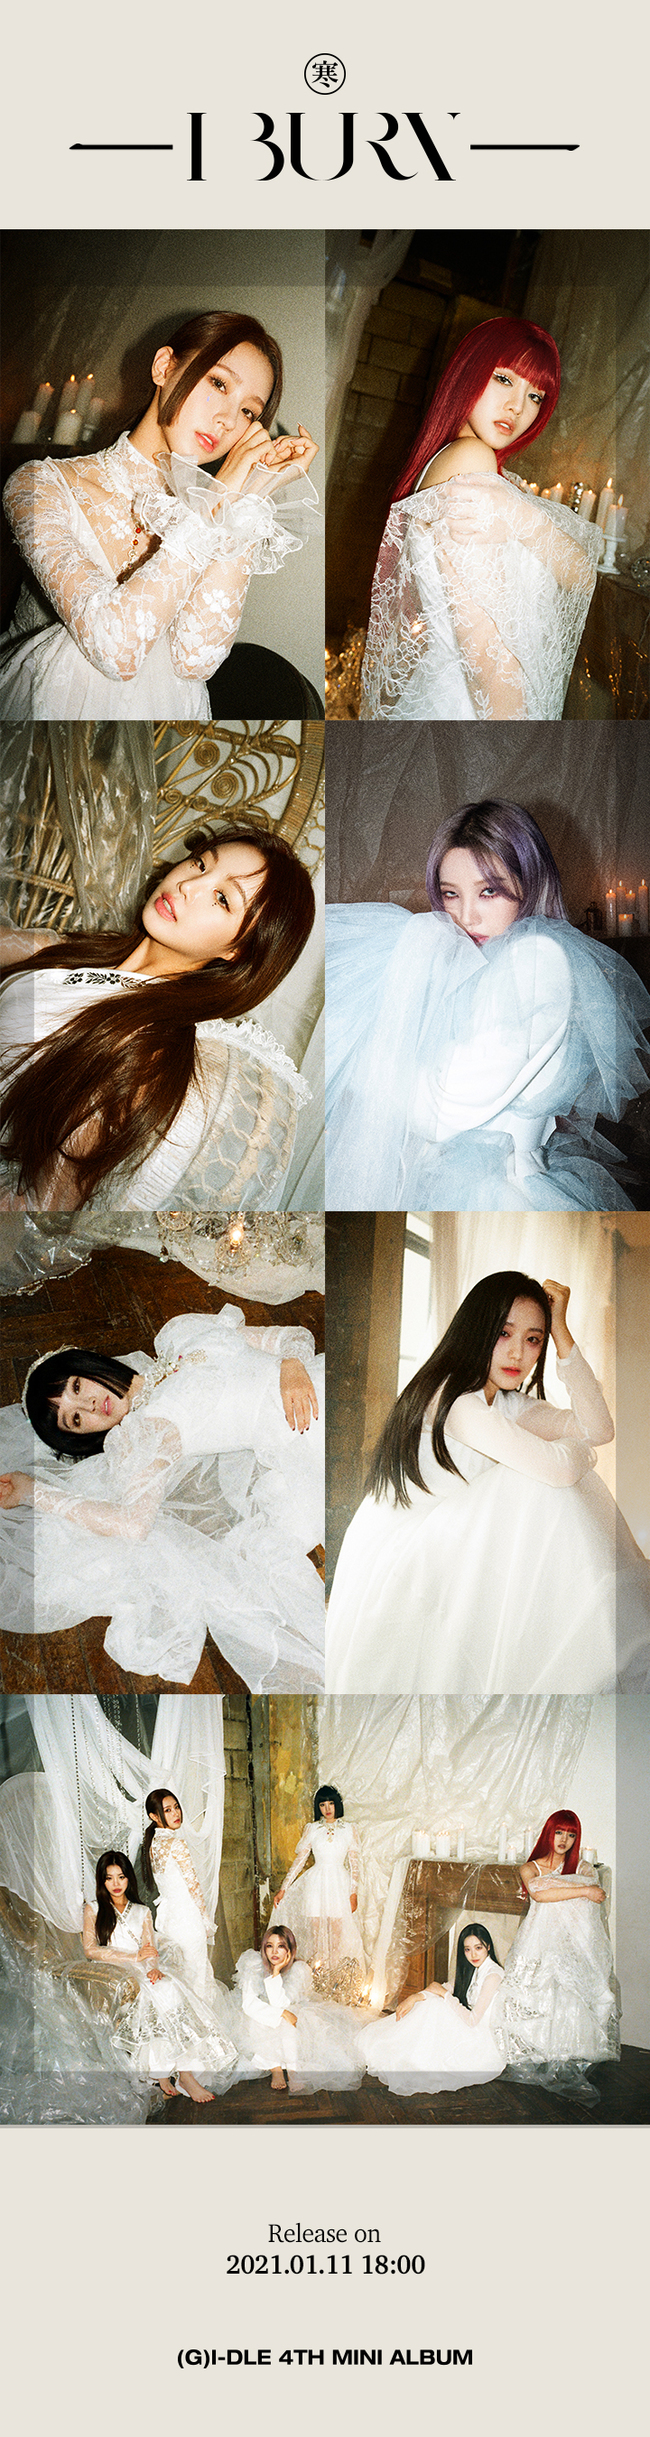 Group (G)I-DLE released the first concept image of the new album.Cube Entertainment released its mini-four album I Burn (I Burn)s Han (I Burn) version concept image on the official SNS channel of (G)I-DLE on January 4.The public image shows (G) I-DLE, which boasts an unrivaled aura in a white dress in an antique prop, lace cloth, and a space full of lighted candles.(G)I-DLE not only fully digested the cold and lonely winter atmosphere under the keyword Han (Han) but also amplified the curiosity about the concept of the new album by foreshadowing an extraordinary visual transformation.GI-DLE, which has been loved by global fans with its unique music and its concept for every comeback, hopes to prove the modifier concept artisan again with a new and mature appearance through this new news.